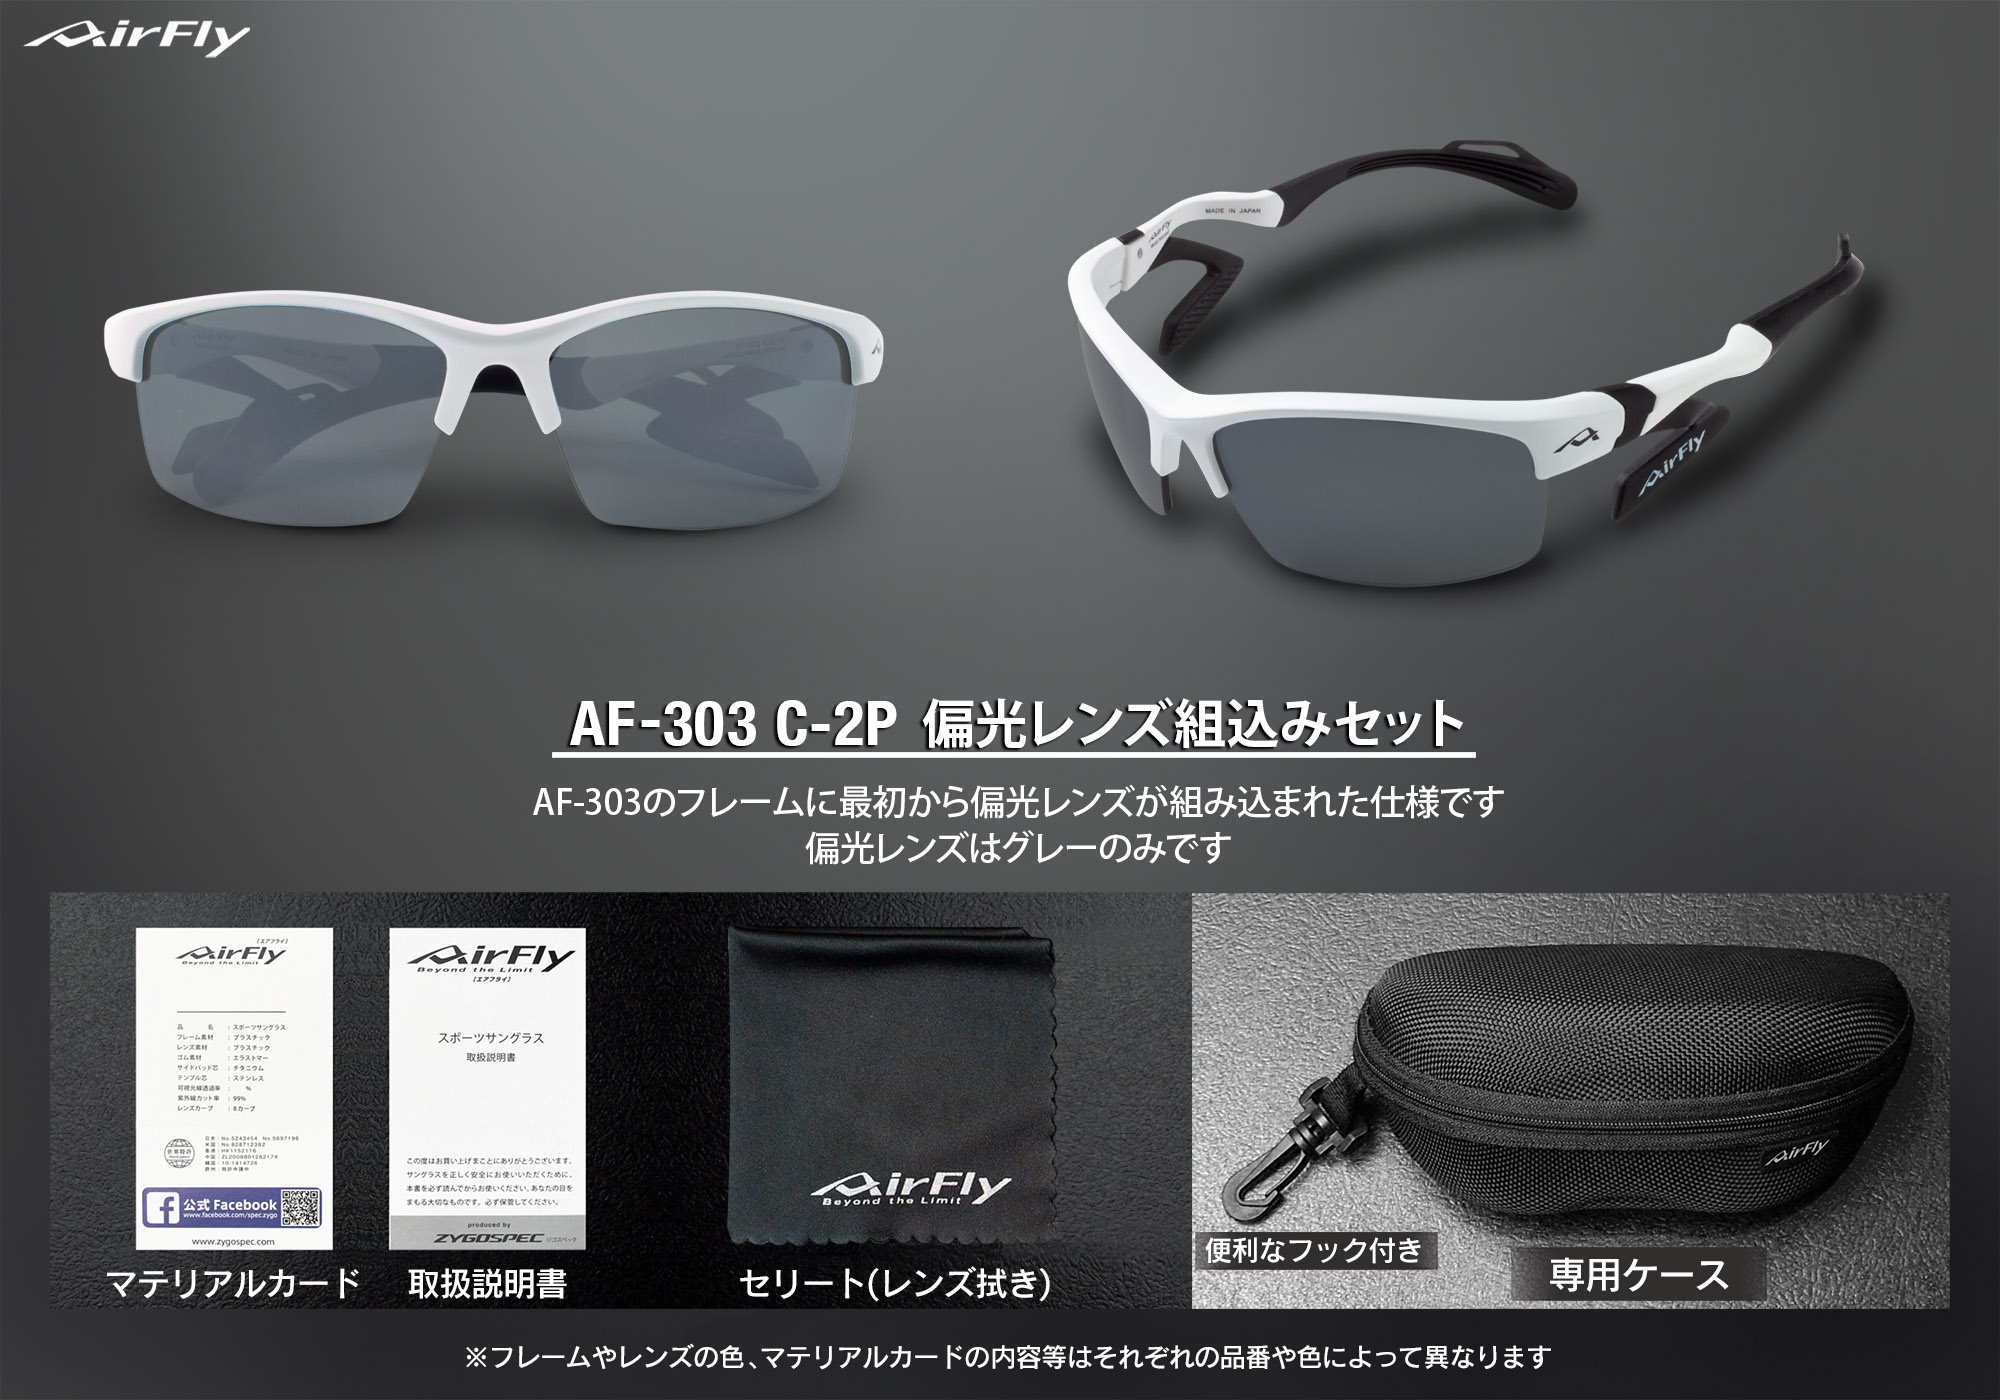 AF-303 C-2P 偏光レンズ組込みセット｜ 商品詳細｜AirFlyオンライン 